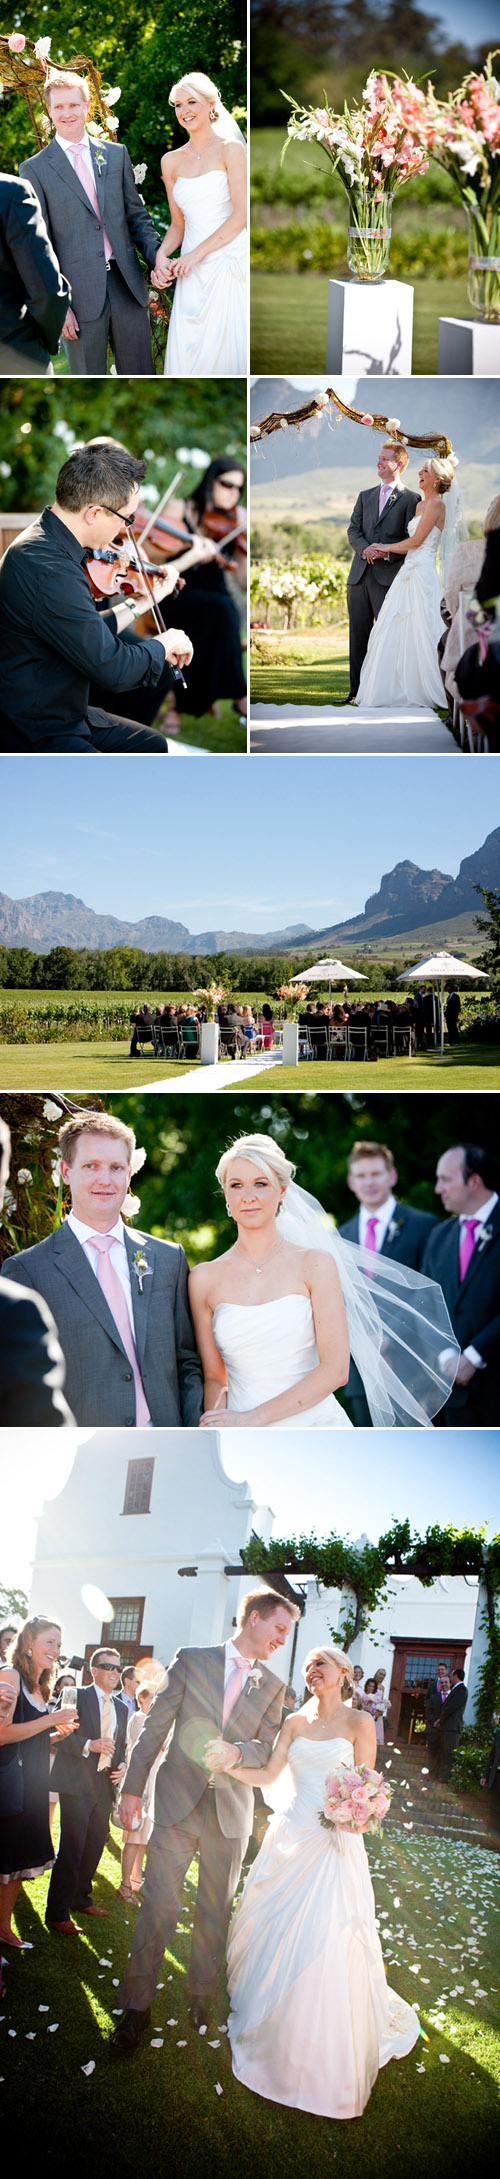 romantic South African real wedding, images from Christine Meintjes